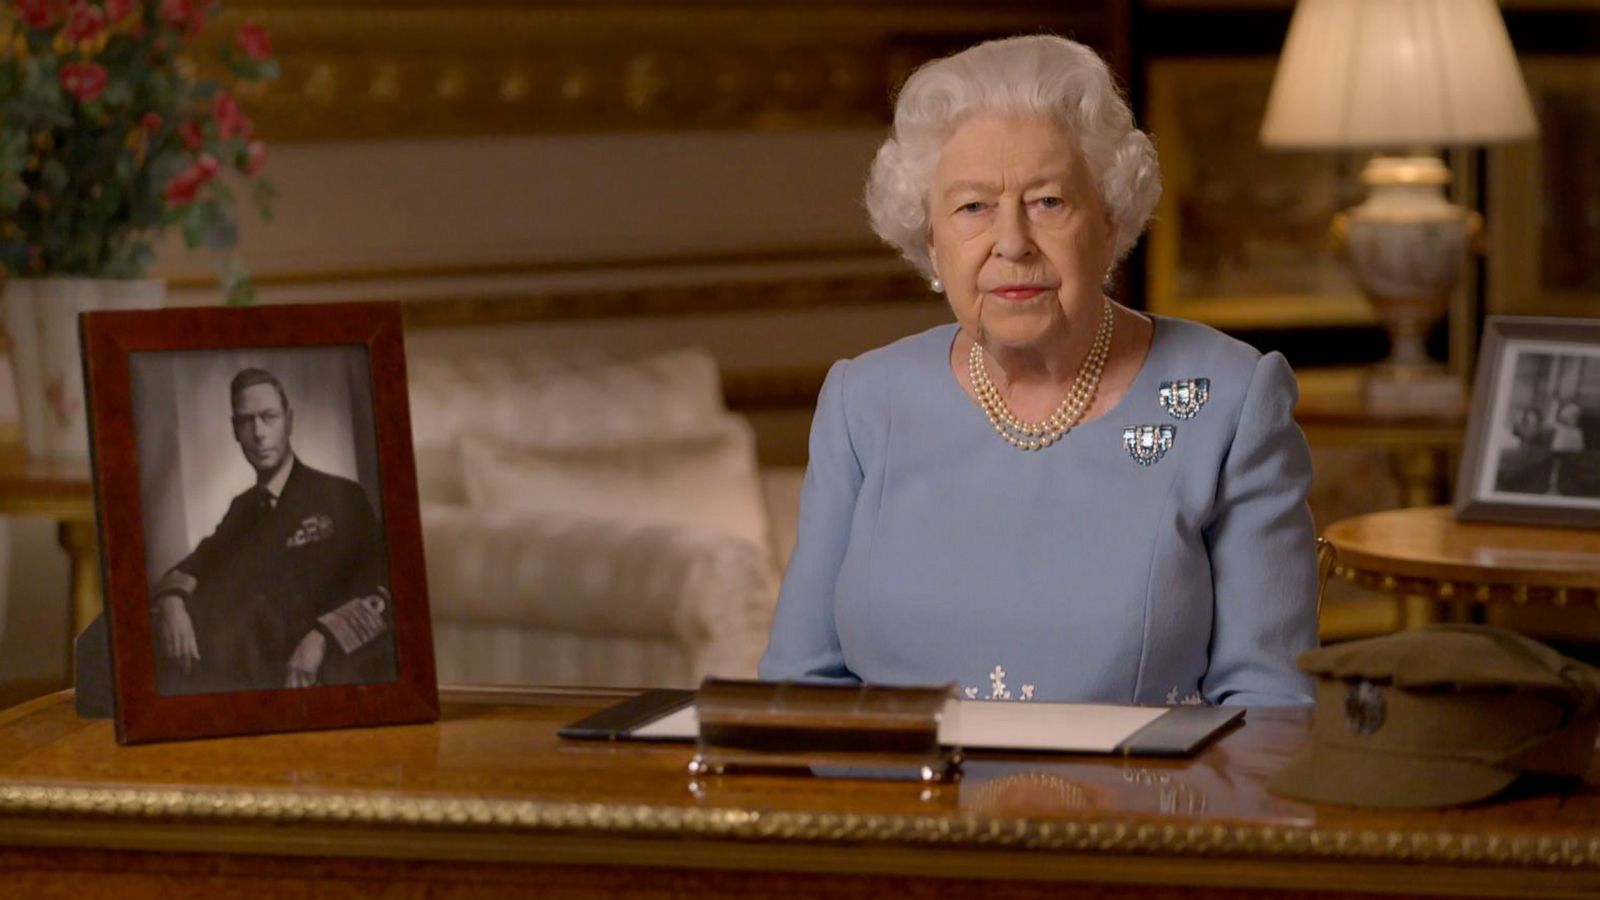 Read Queen 75th of VE America marking Good anniversary Elizabeth\'s Morning the - Day speech